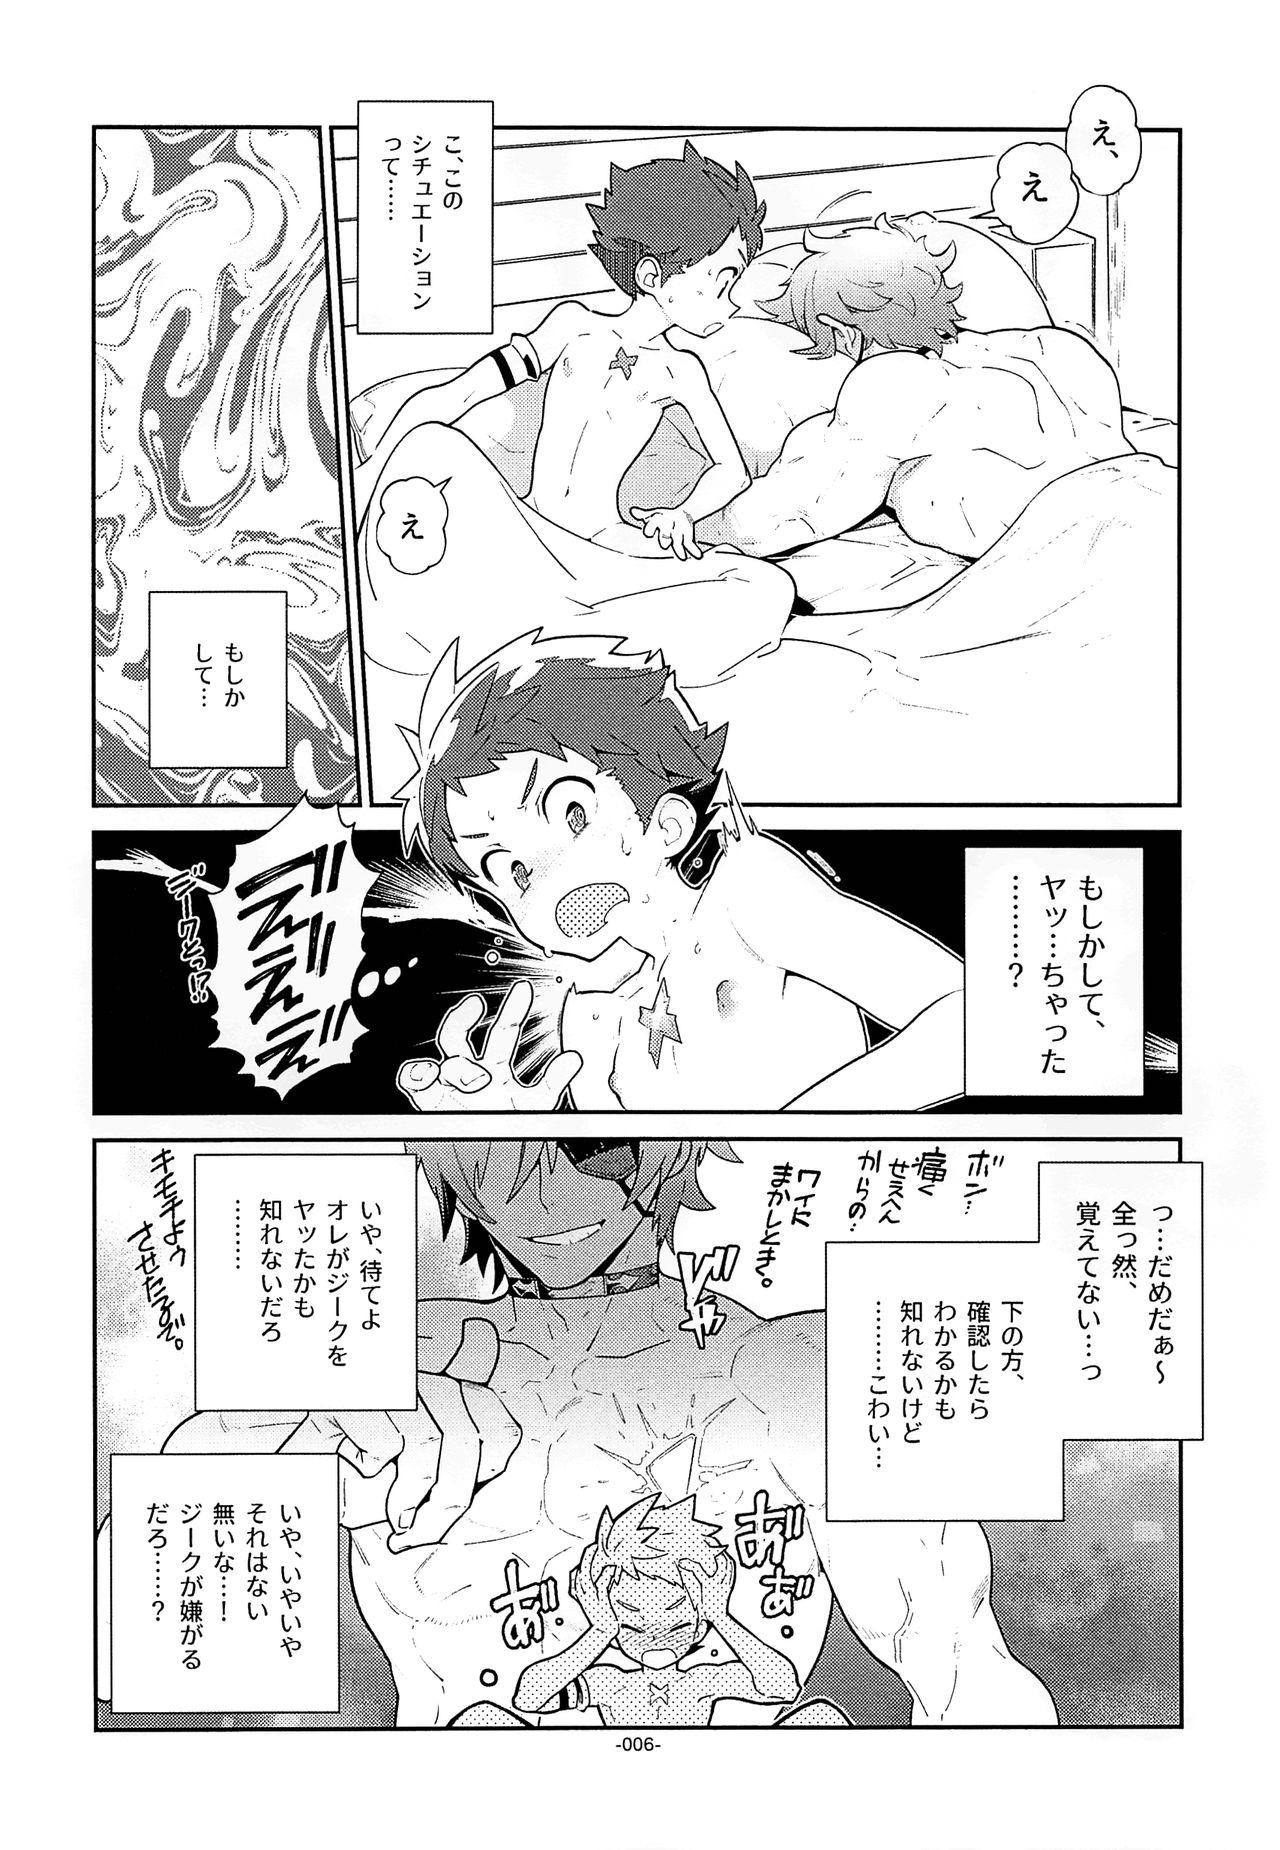 Hot Teen Memento - Xenoblade chronicles 2 Pussy To Mouth - Page 5